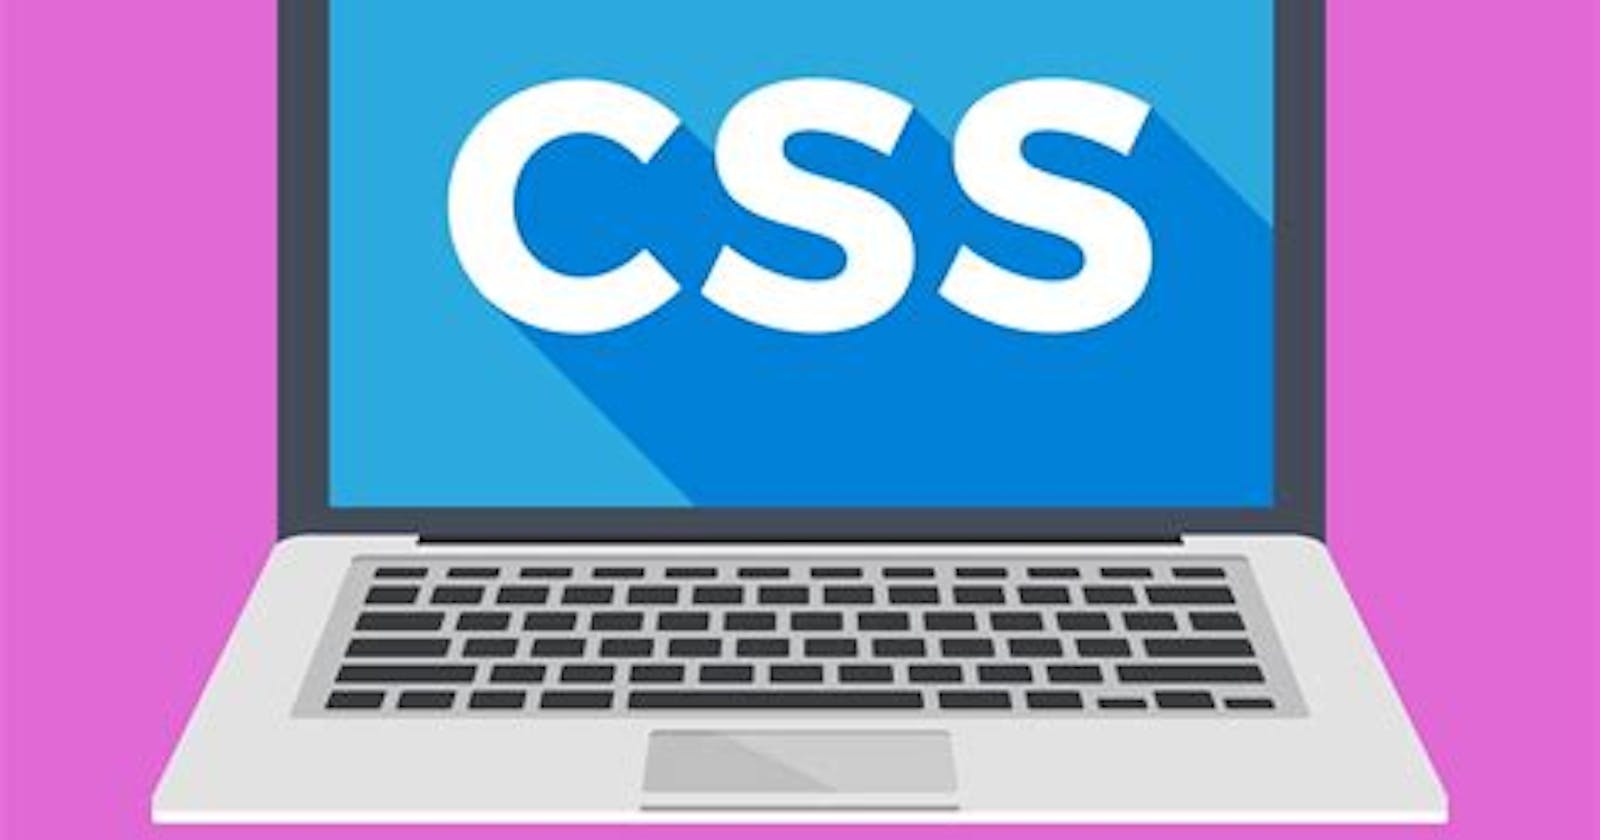 Why use BEM naming conventions in CSS?